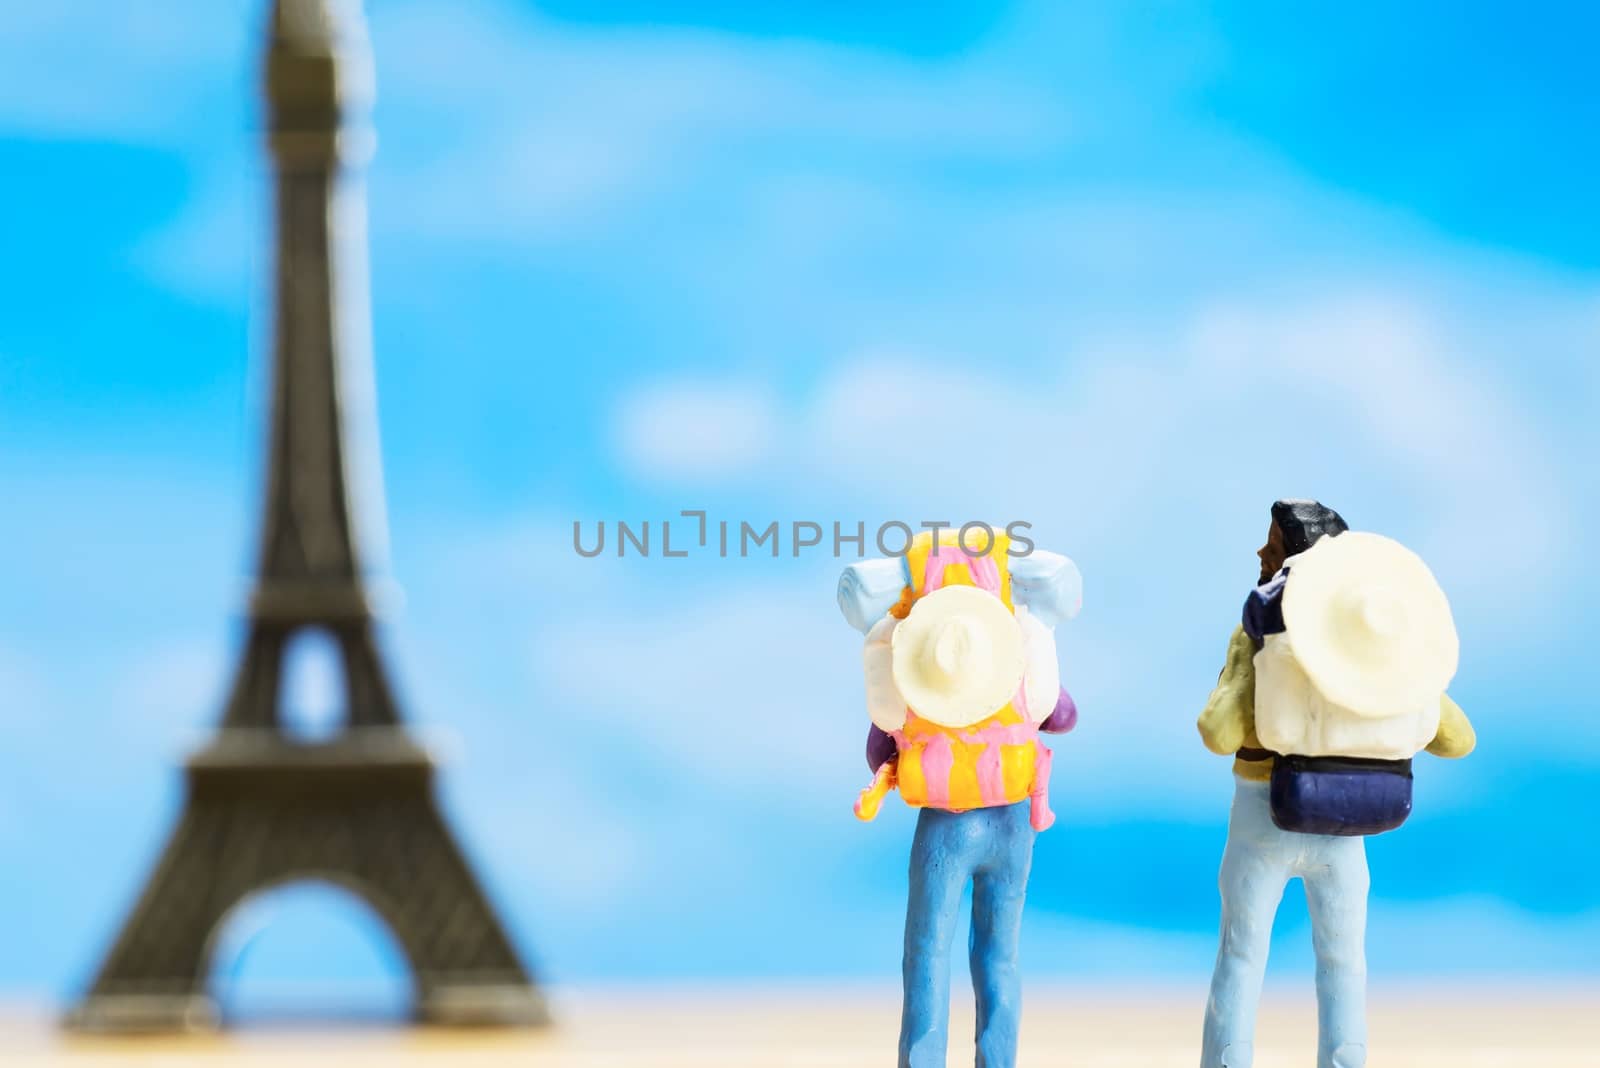 Small traveller figure for World Tourism Day background - September 27, UNWTO World Tourism Day celebration concept by pairhandmade